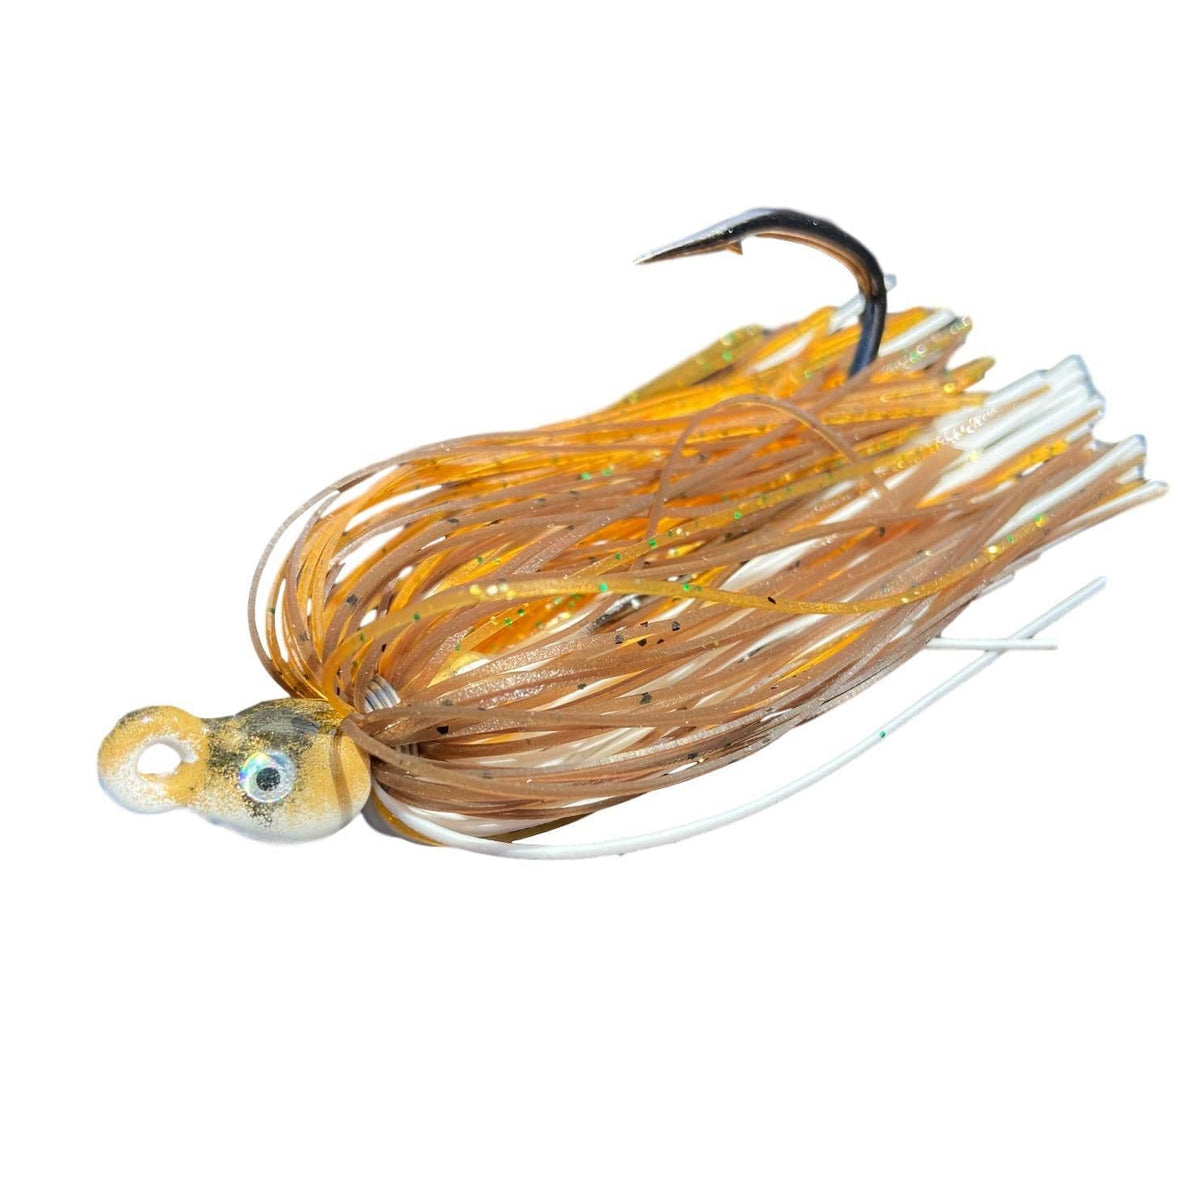 Buy Artificial Bait For Deep Sea Fishing online